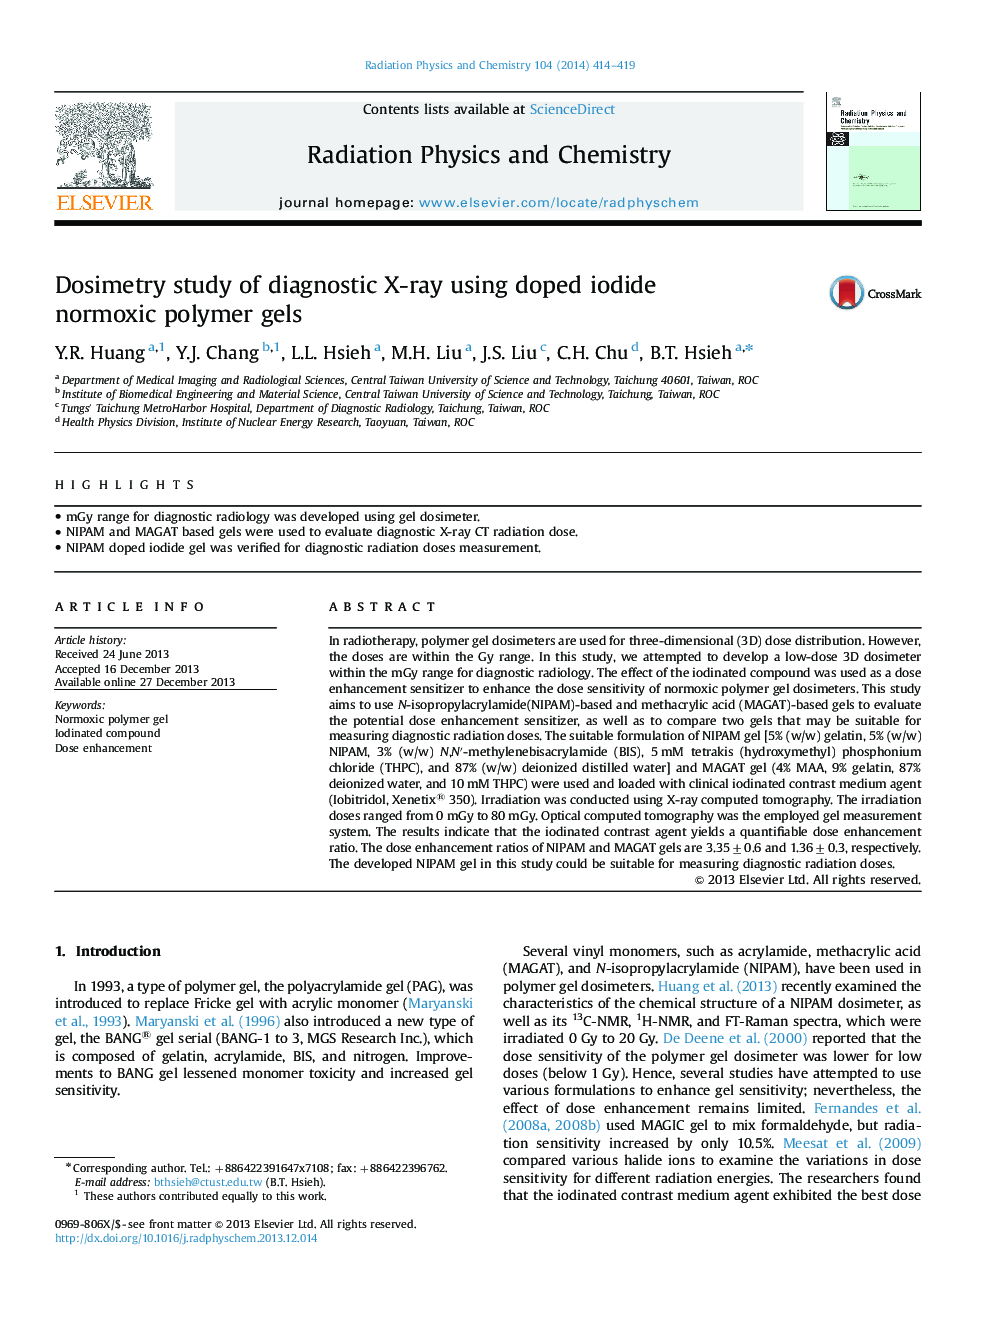 Dosimetry study of diagnostic X-ray using doped iodide normoxic polymer gels